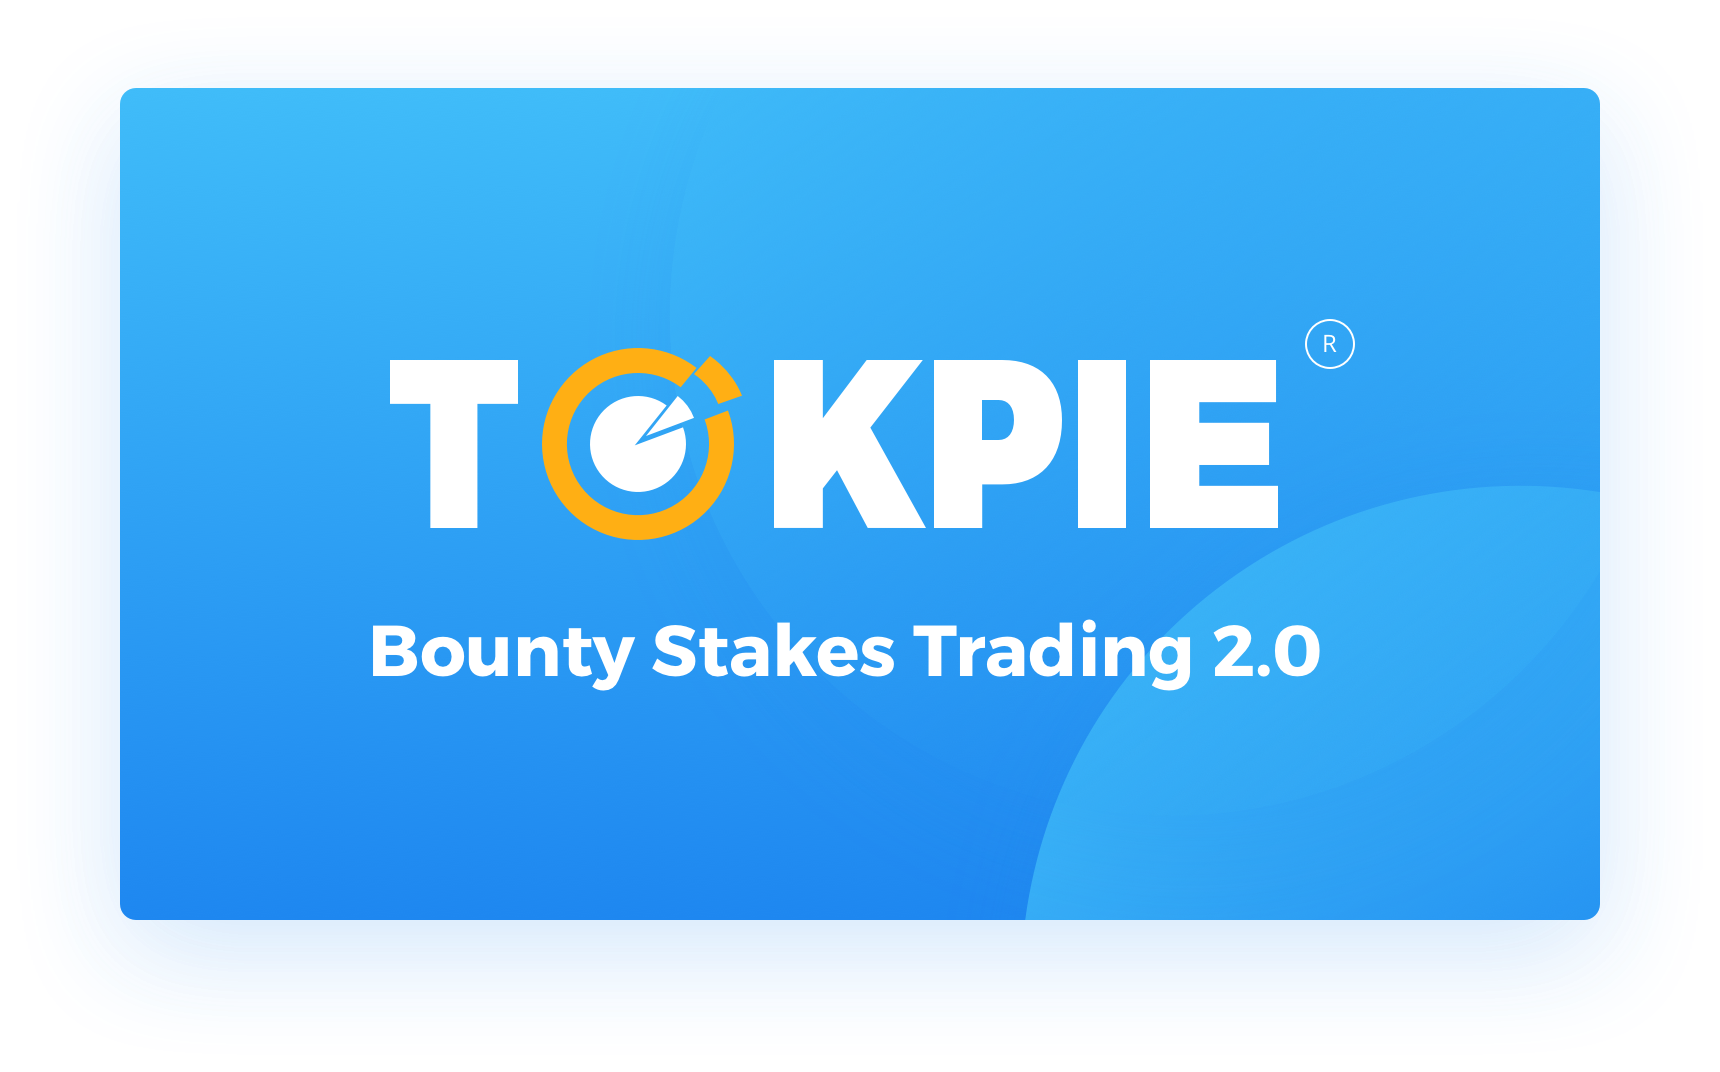 Bounty Stakes Trading 2.0 introduction - Tokpie Blog